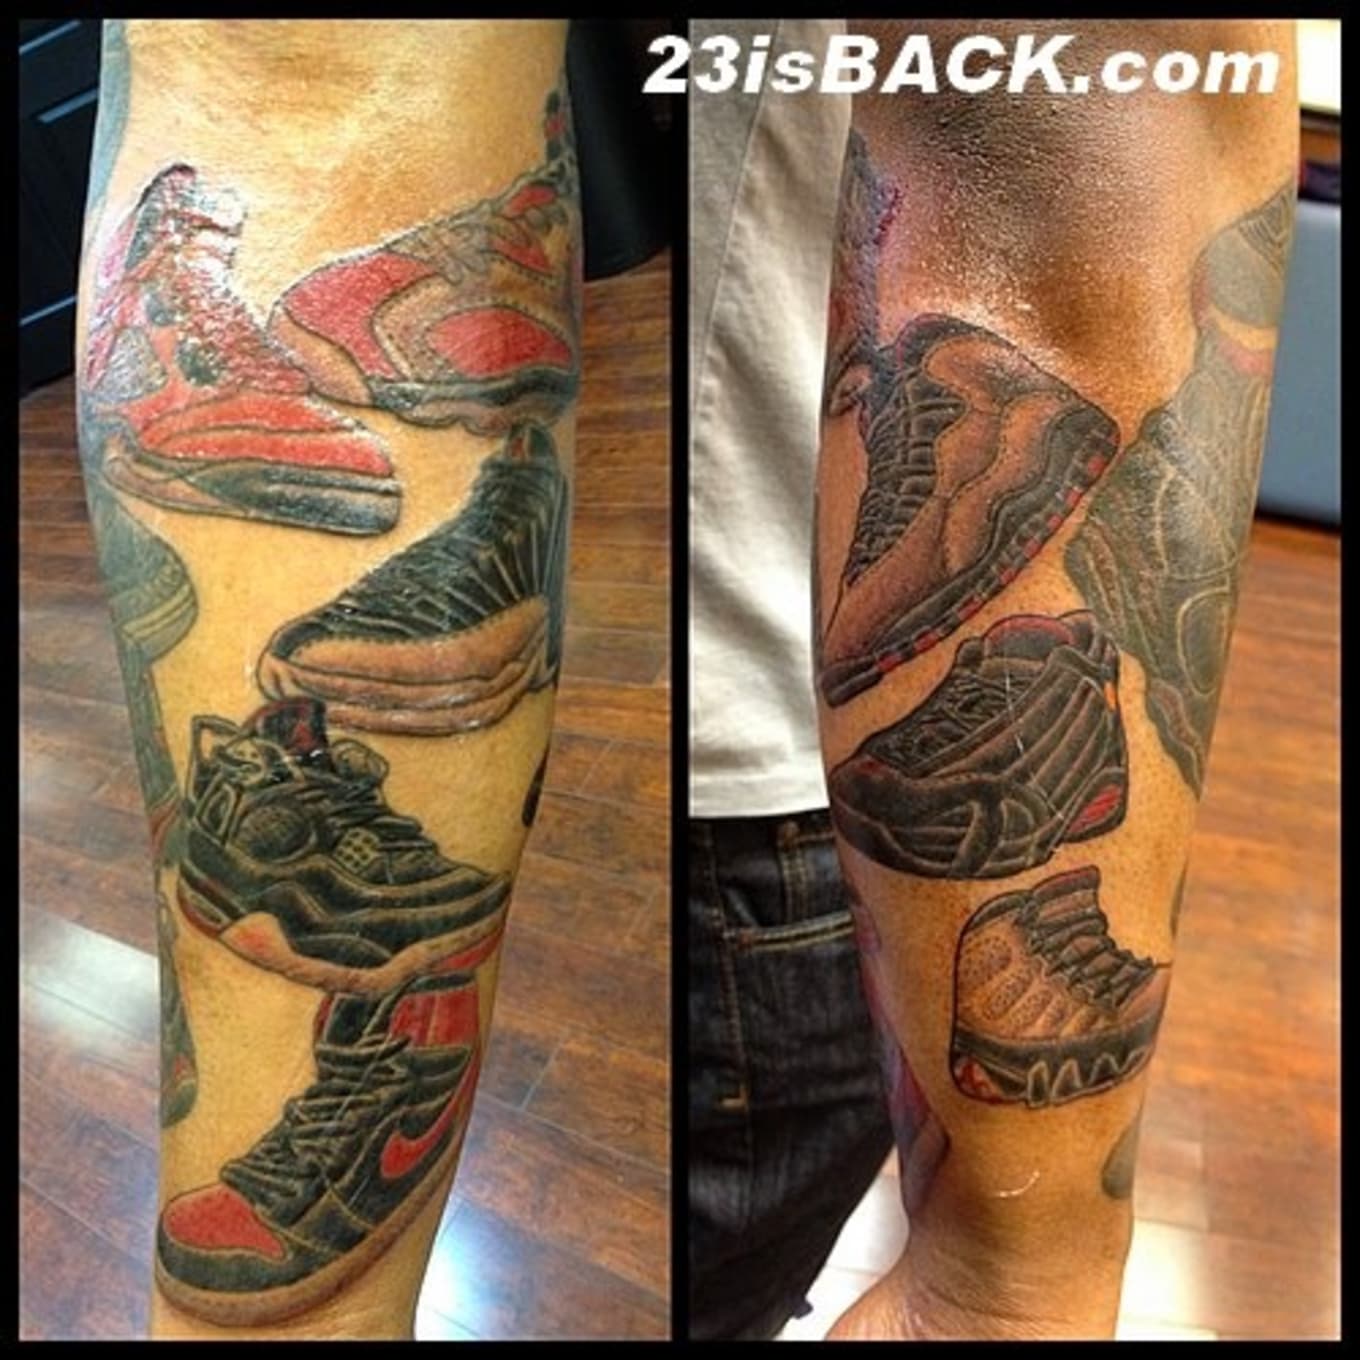 Best Sneaker Tattoos | Sole Collector